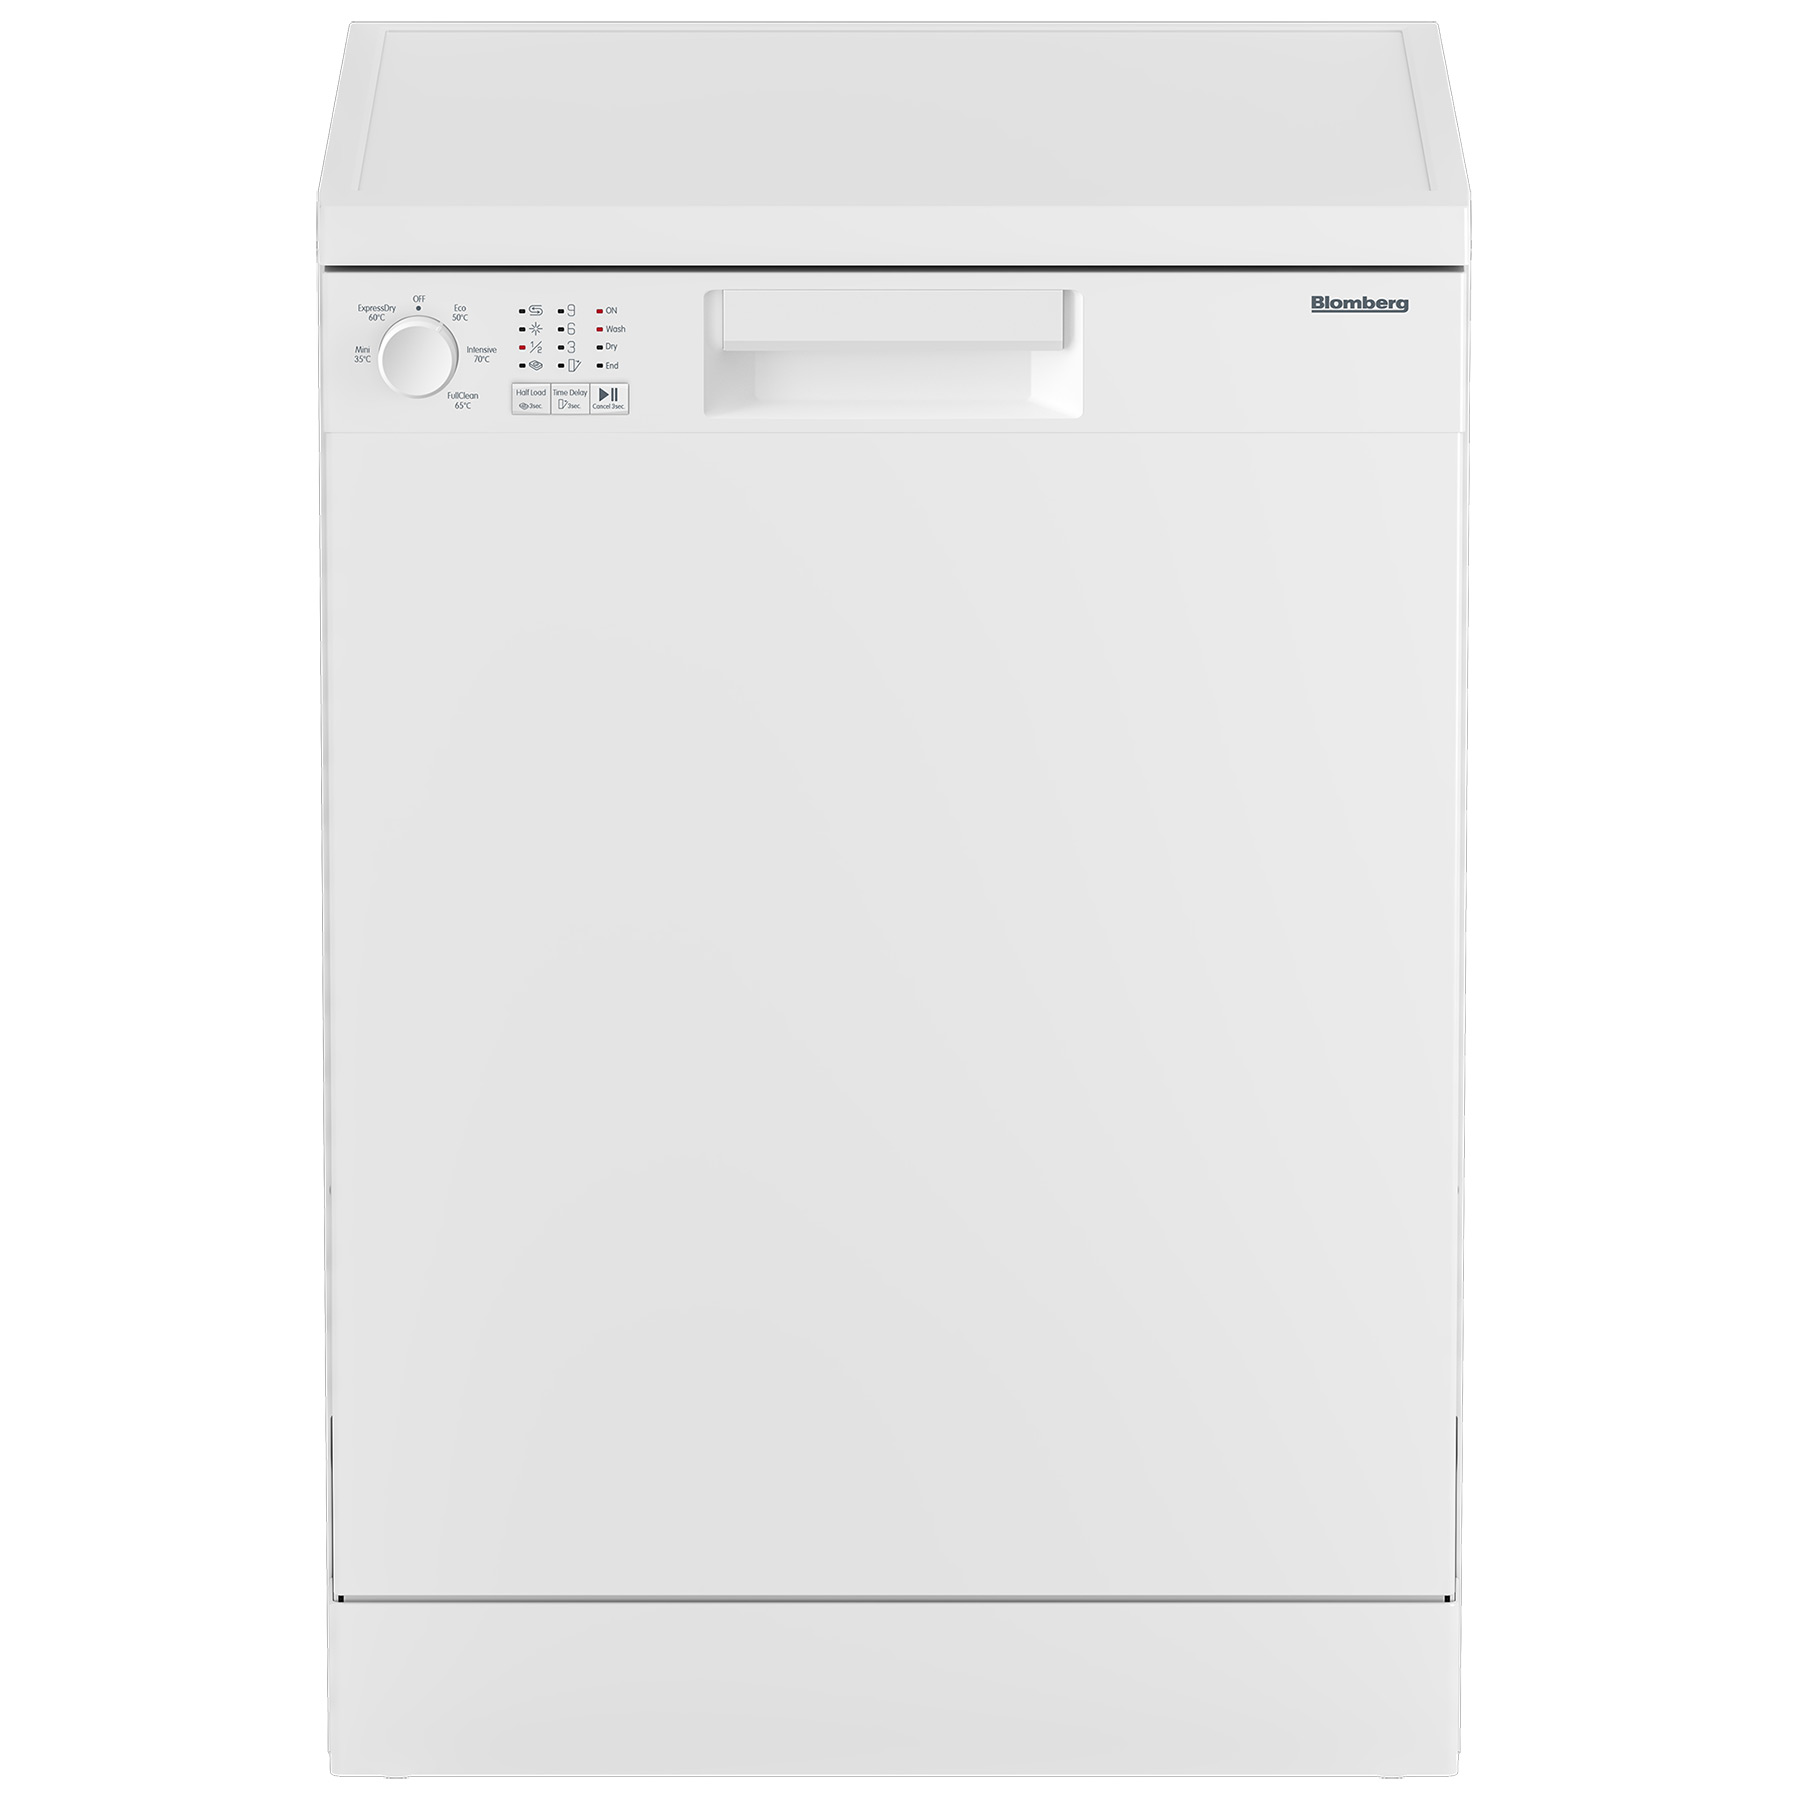 Image of Blomberg LDF30210W 60cm Dishwasher in White 14 Place Setting E Rated 3